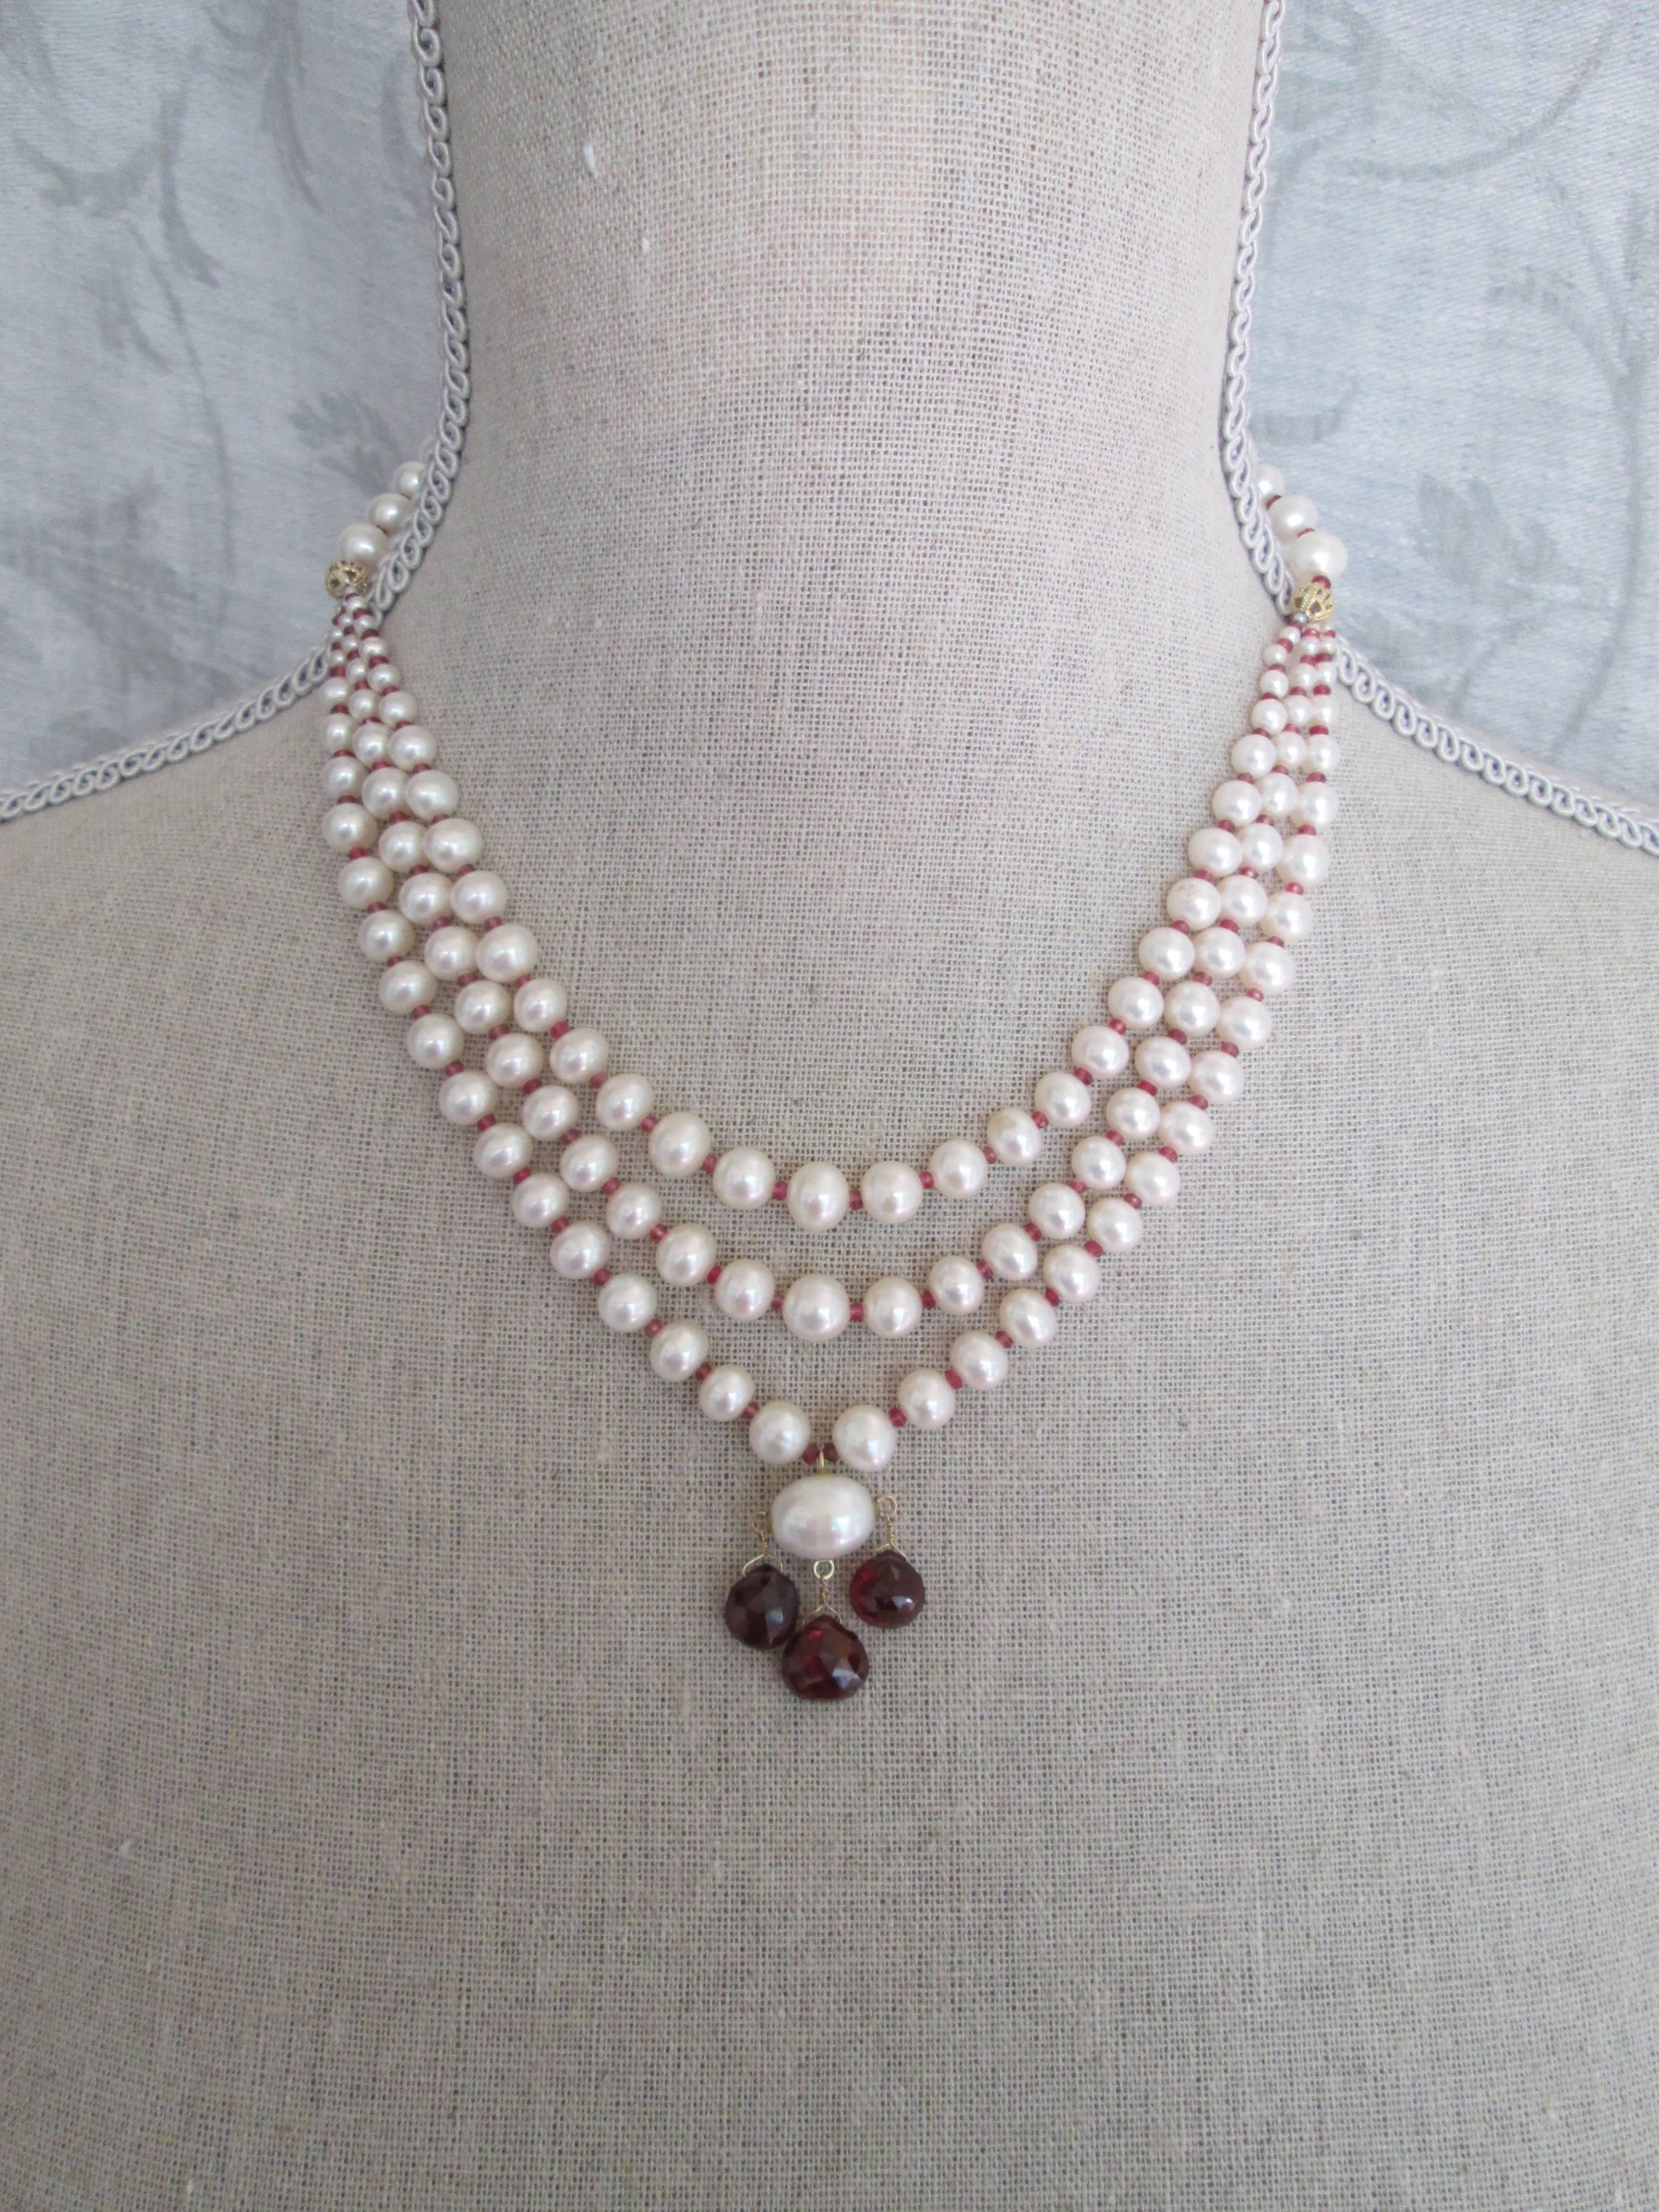 Bead Marina J. 3 Strands of Graduated Pearl Necklace with Garnet & 14k Yellow Gold